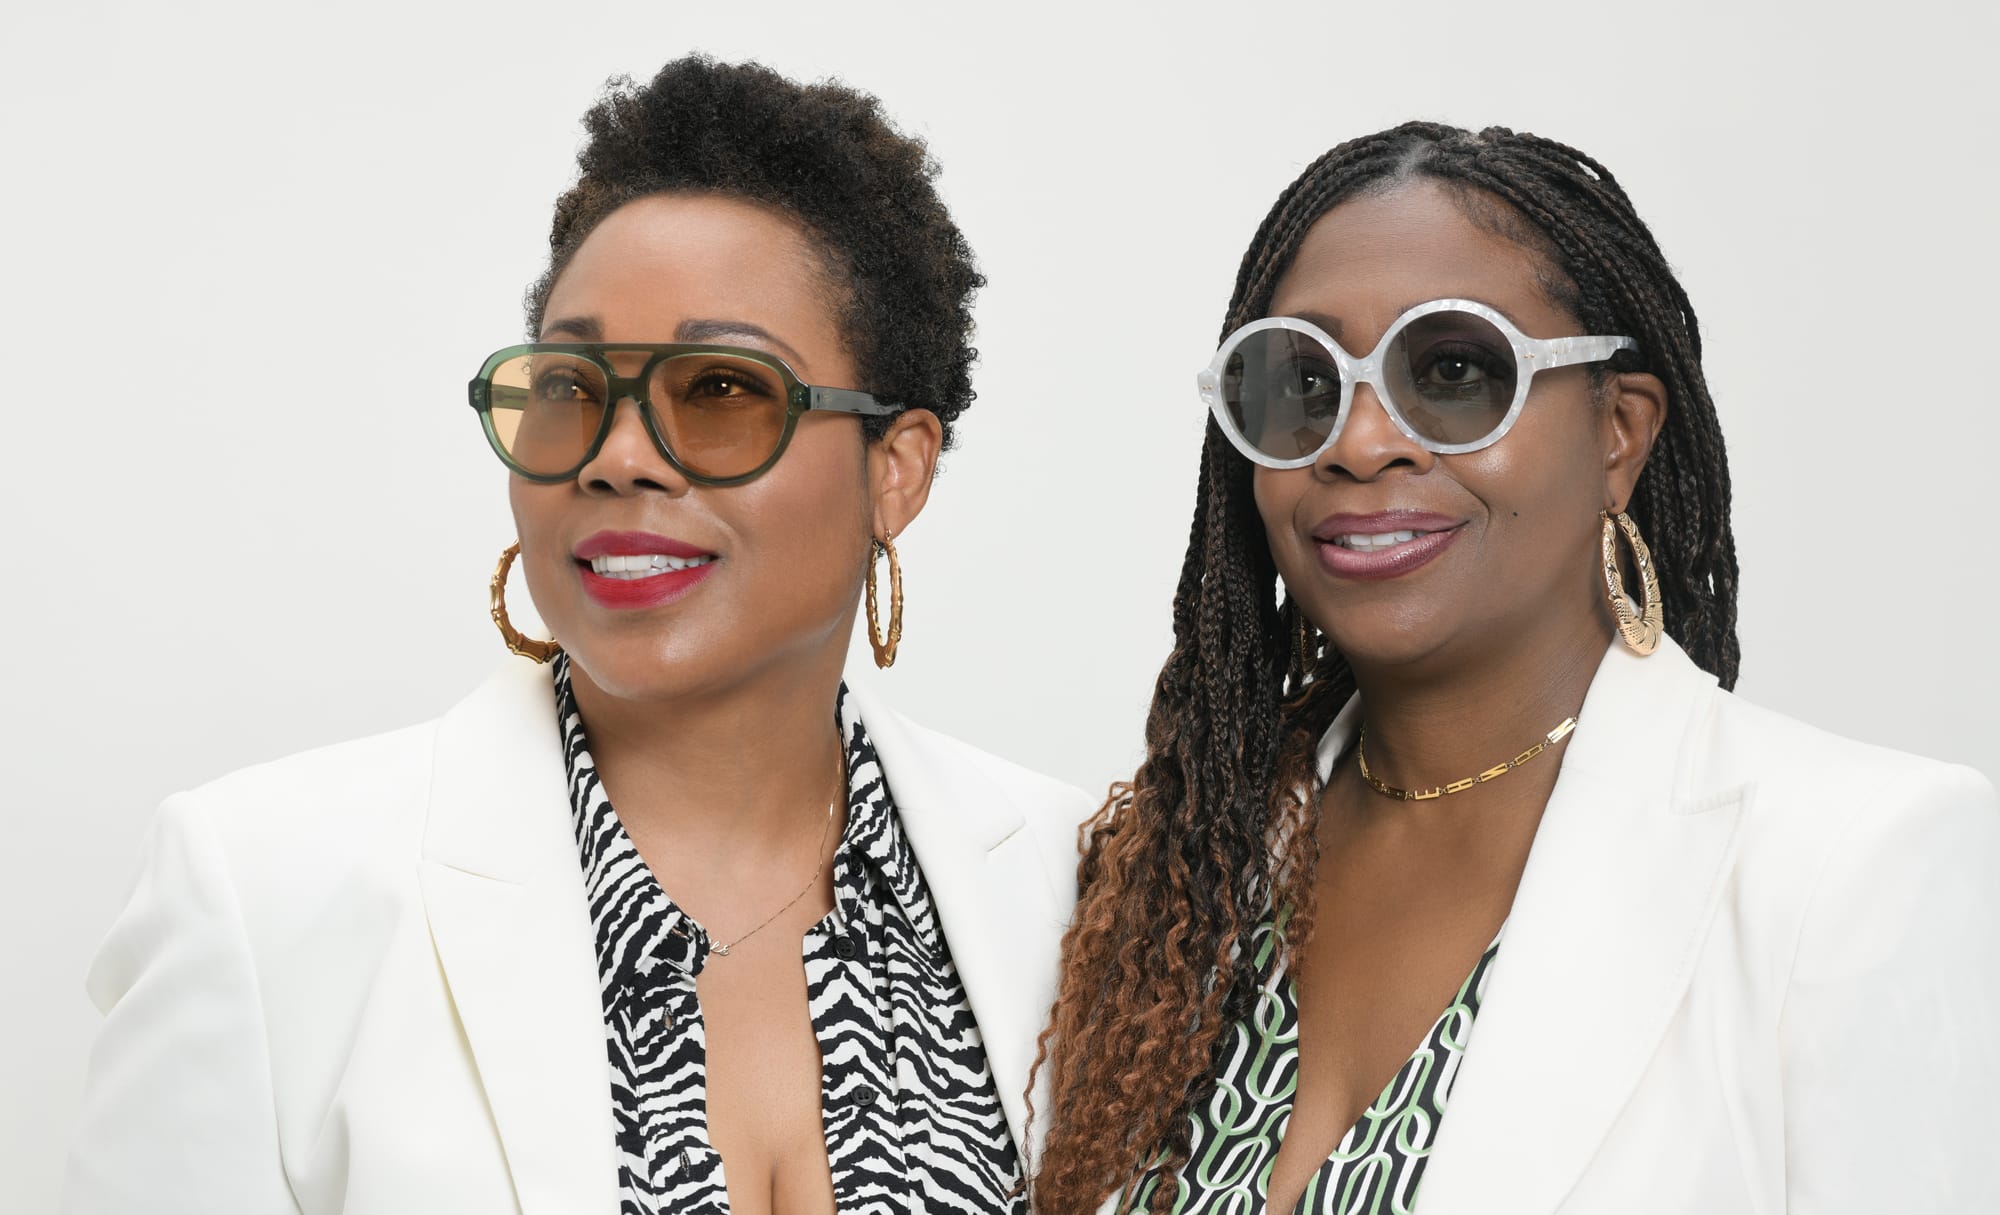 Black Woman-Owned Eyewear Brand Makes History With Major Distribution Deal in 900 Retail Stores